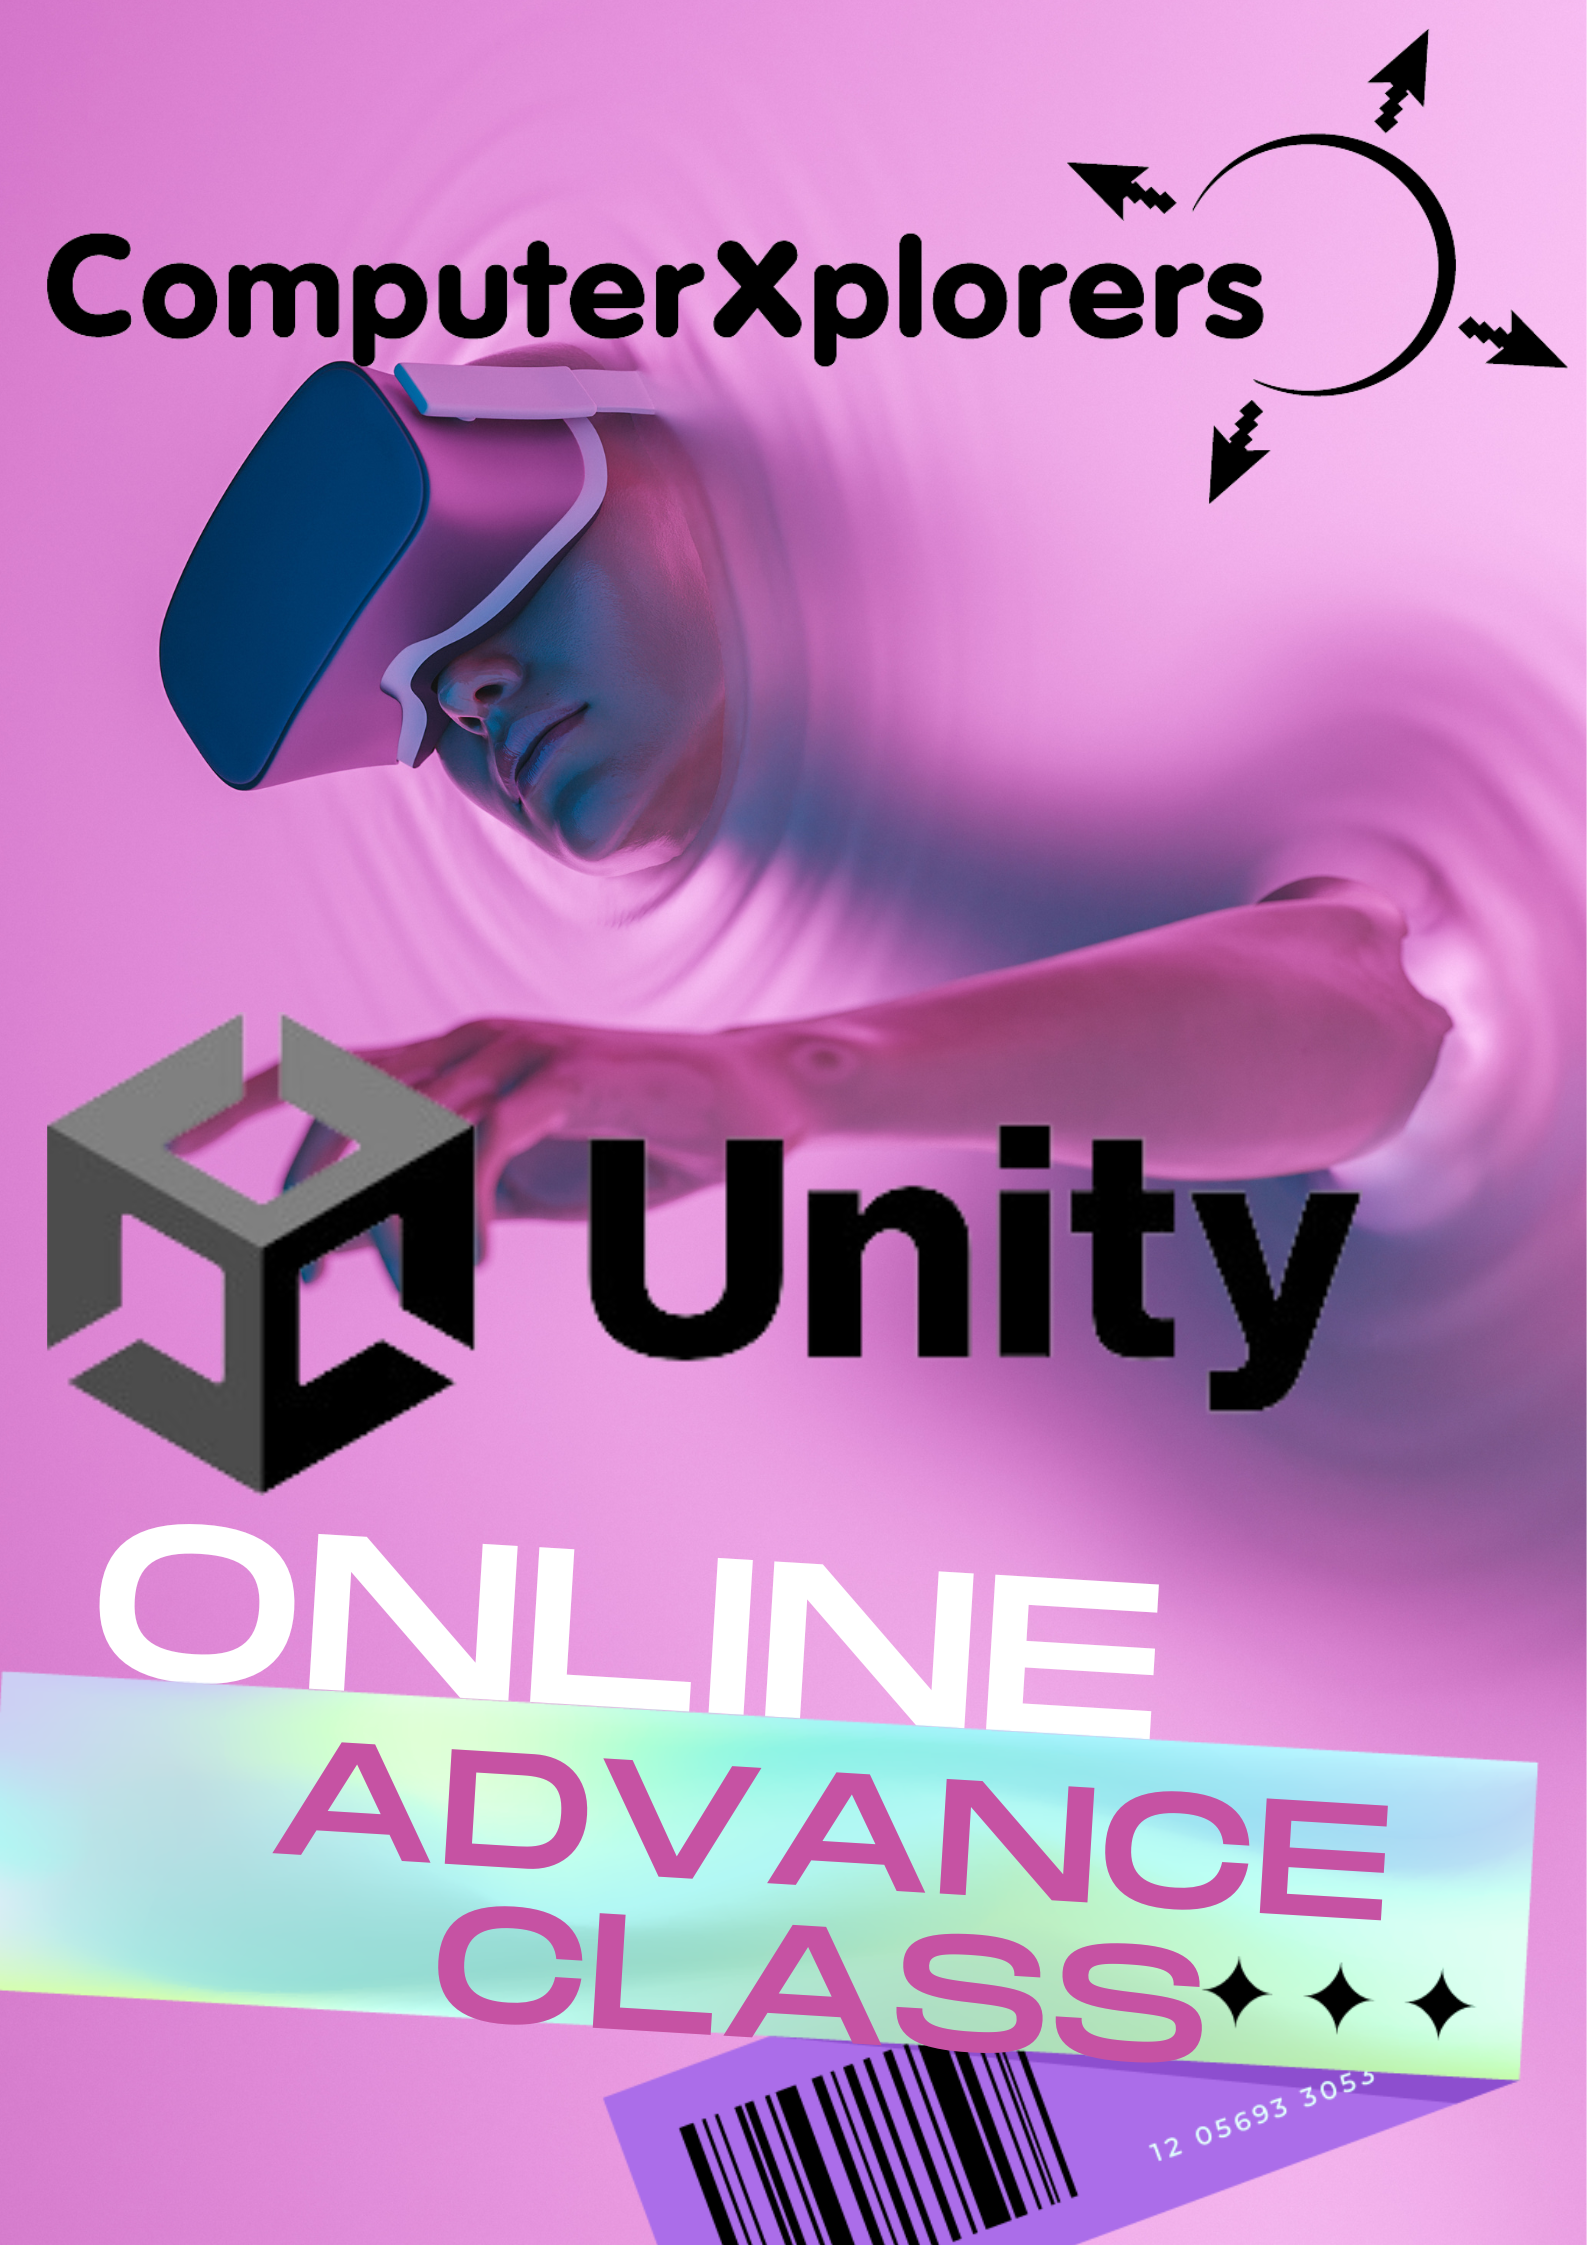 Online Computing classes – Advance class using Unity and C#